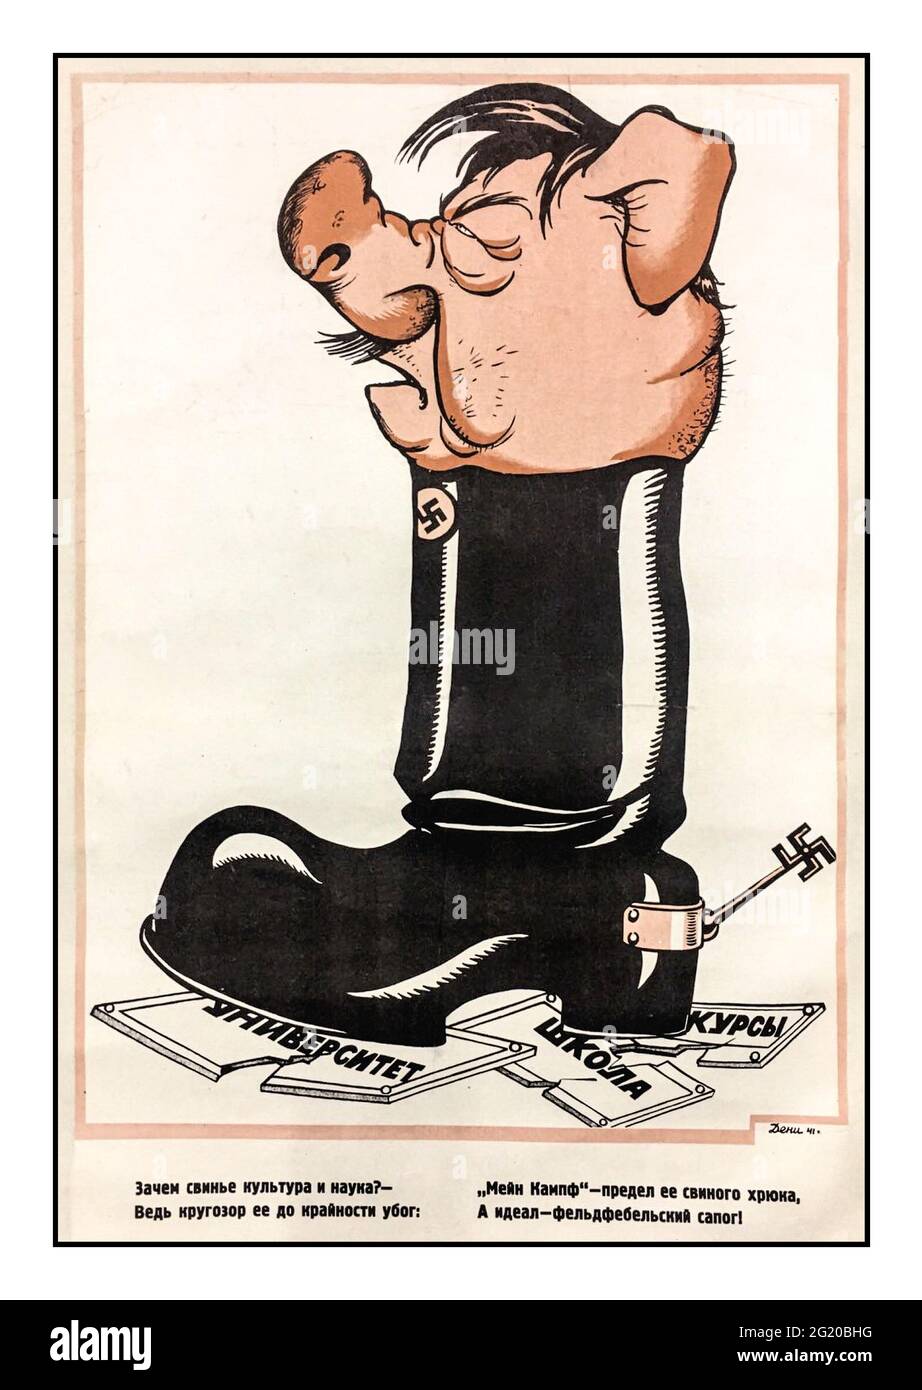 WW2 Anti Nazi Racist Soviet Adolf Hitler 1940’s Caricature Illustration of Hitler with a bloated pigs head jammed into a Nazi jackboot  “Why does a pig need culture and science? - After all, her outlook is extremely poor: 'Meine Kampf' is the limit of her pork grunt & the ideal is a Feldwebel's boot! “ World War II: 1941-1945 The Great Patriotic War USSR Soviet Union Russia Anti-fascist fascism Stock Photo